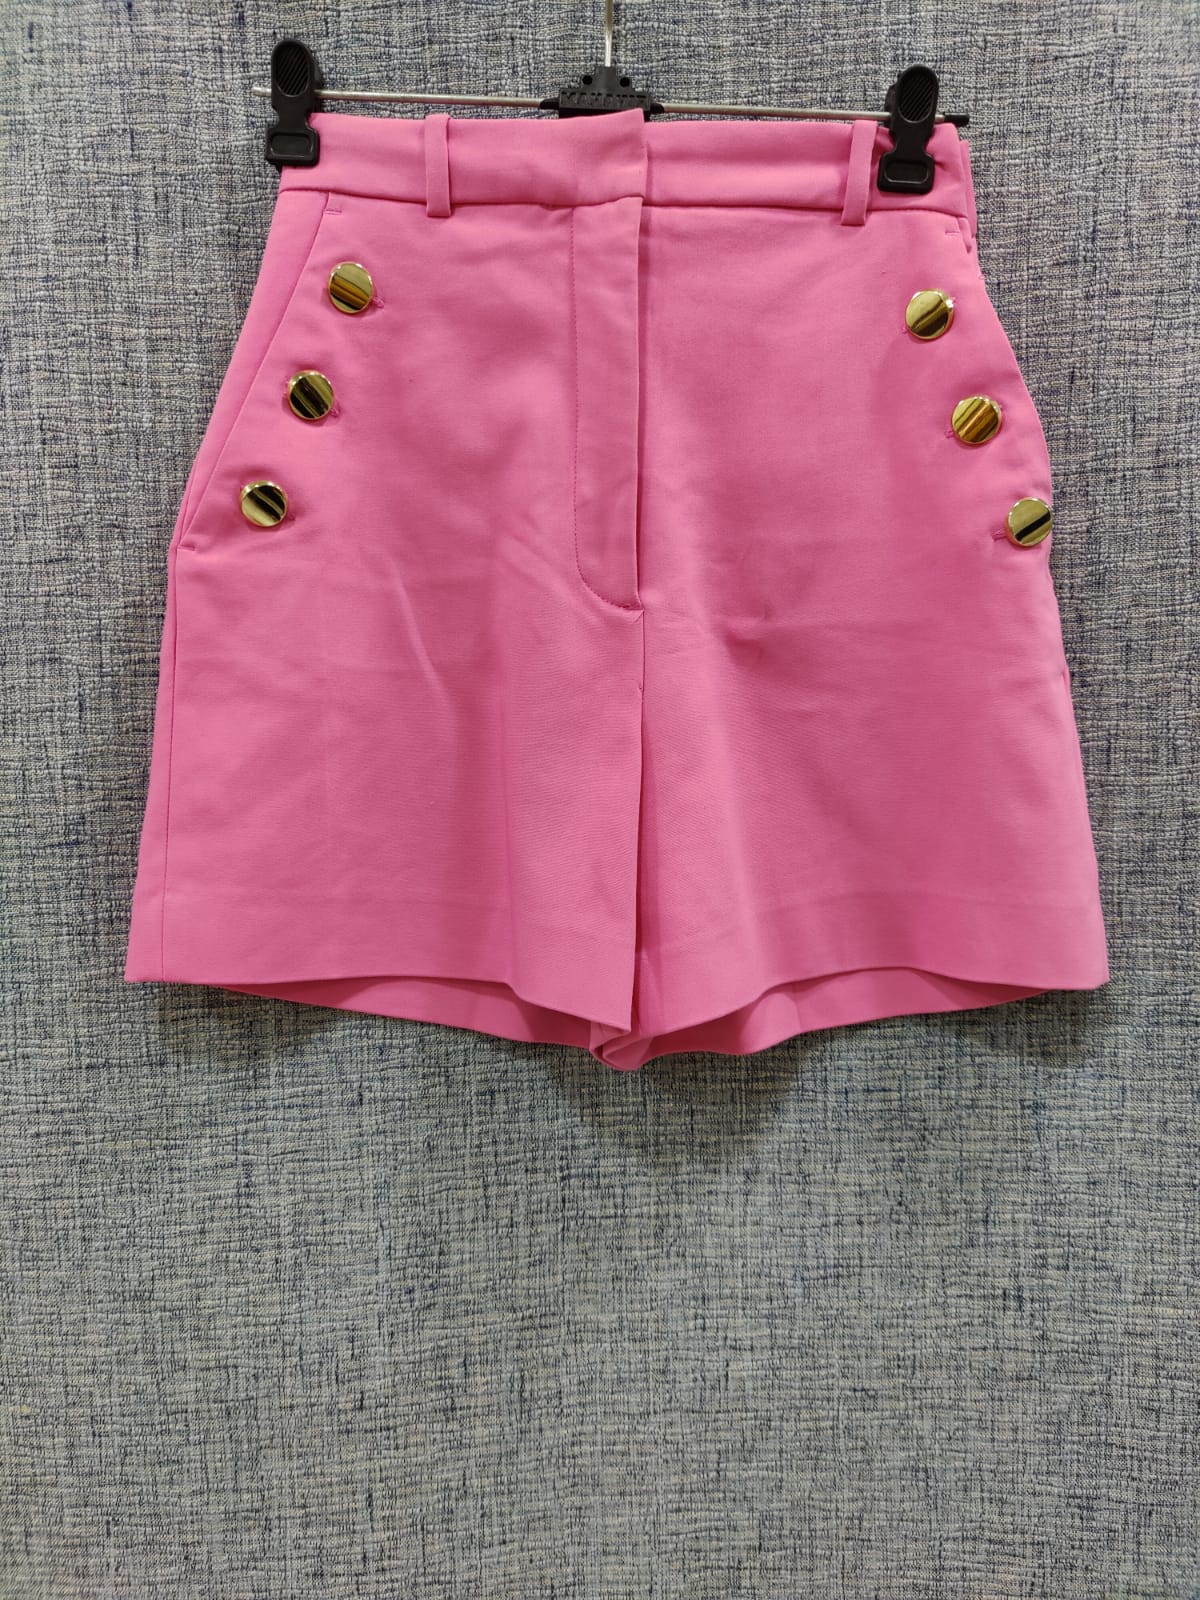 ZARA Pink Shorts With Golden Buttons Shorts | Relove